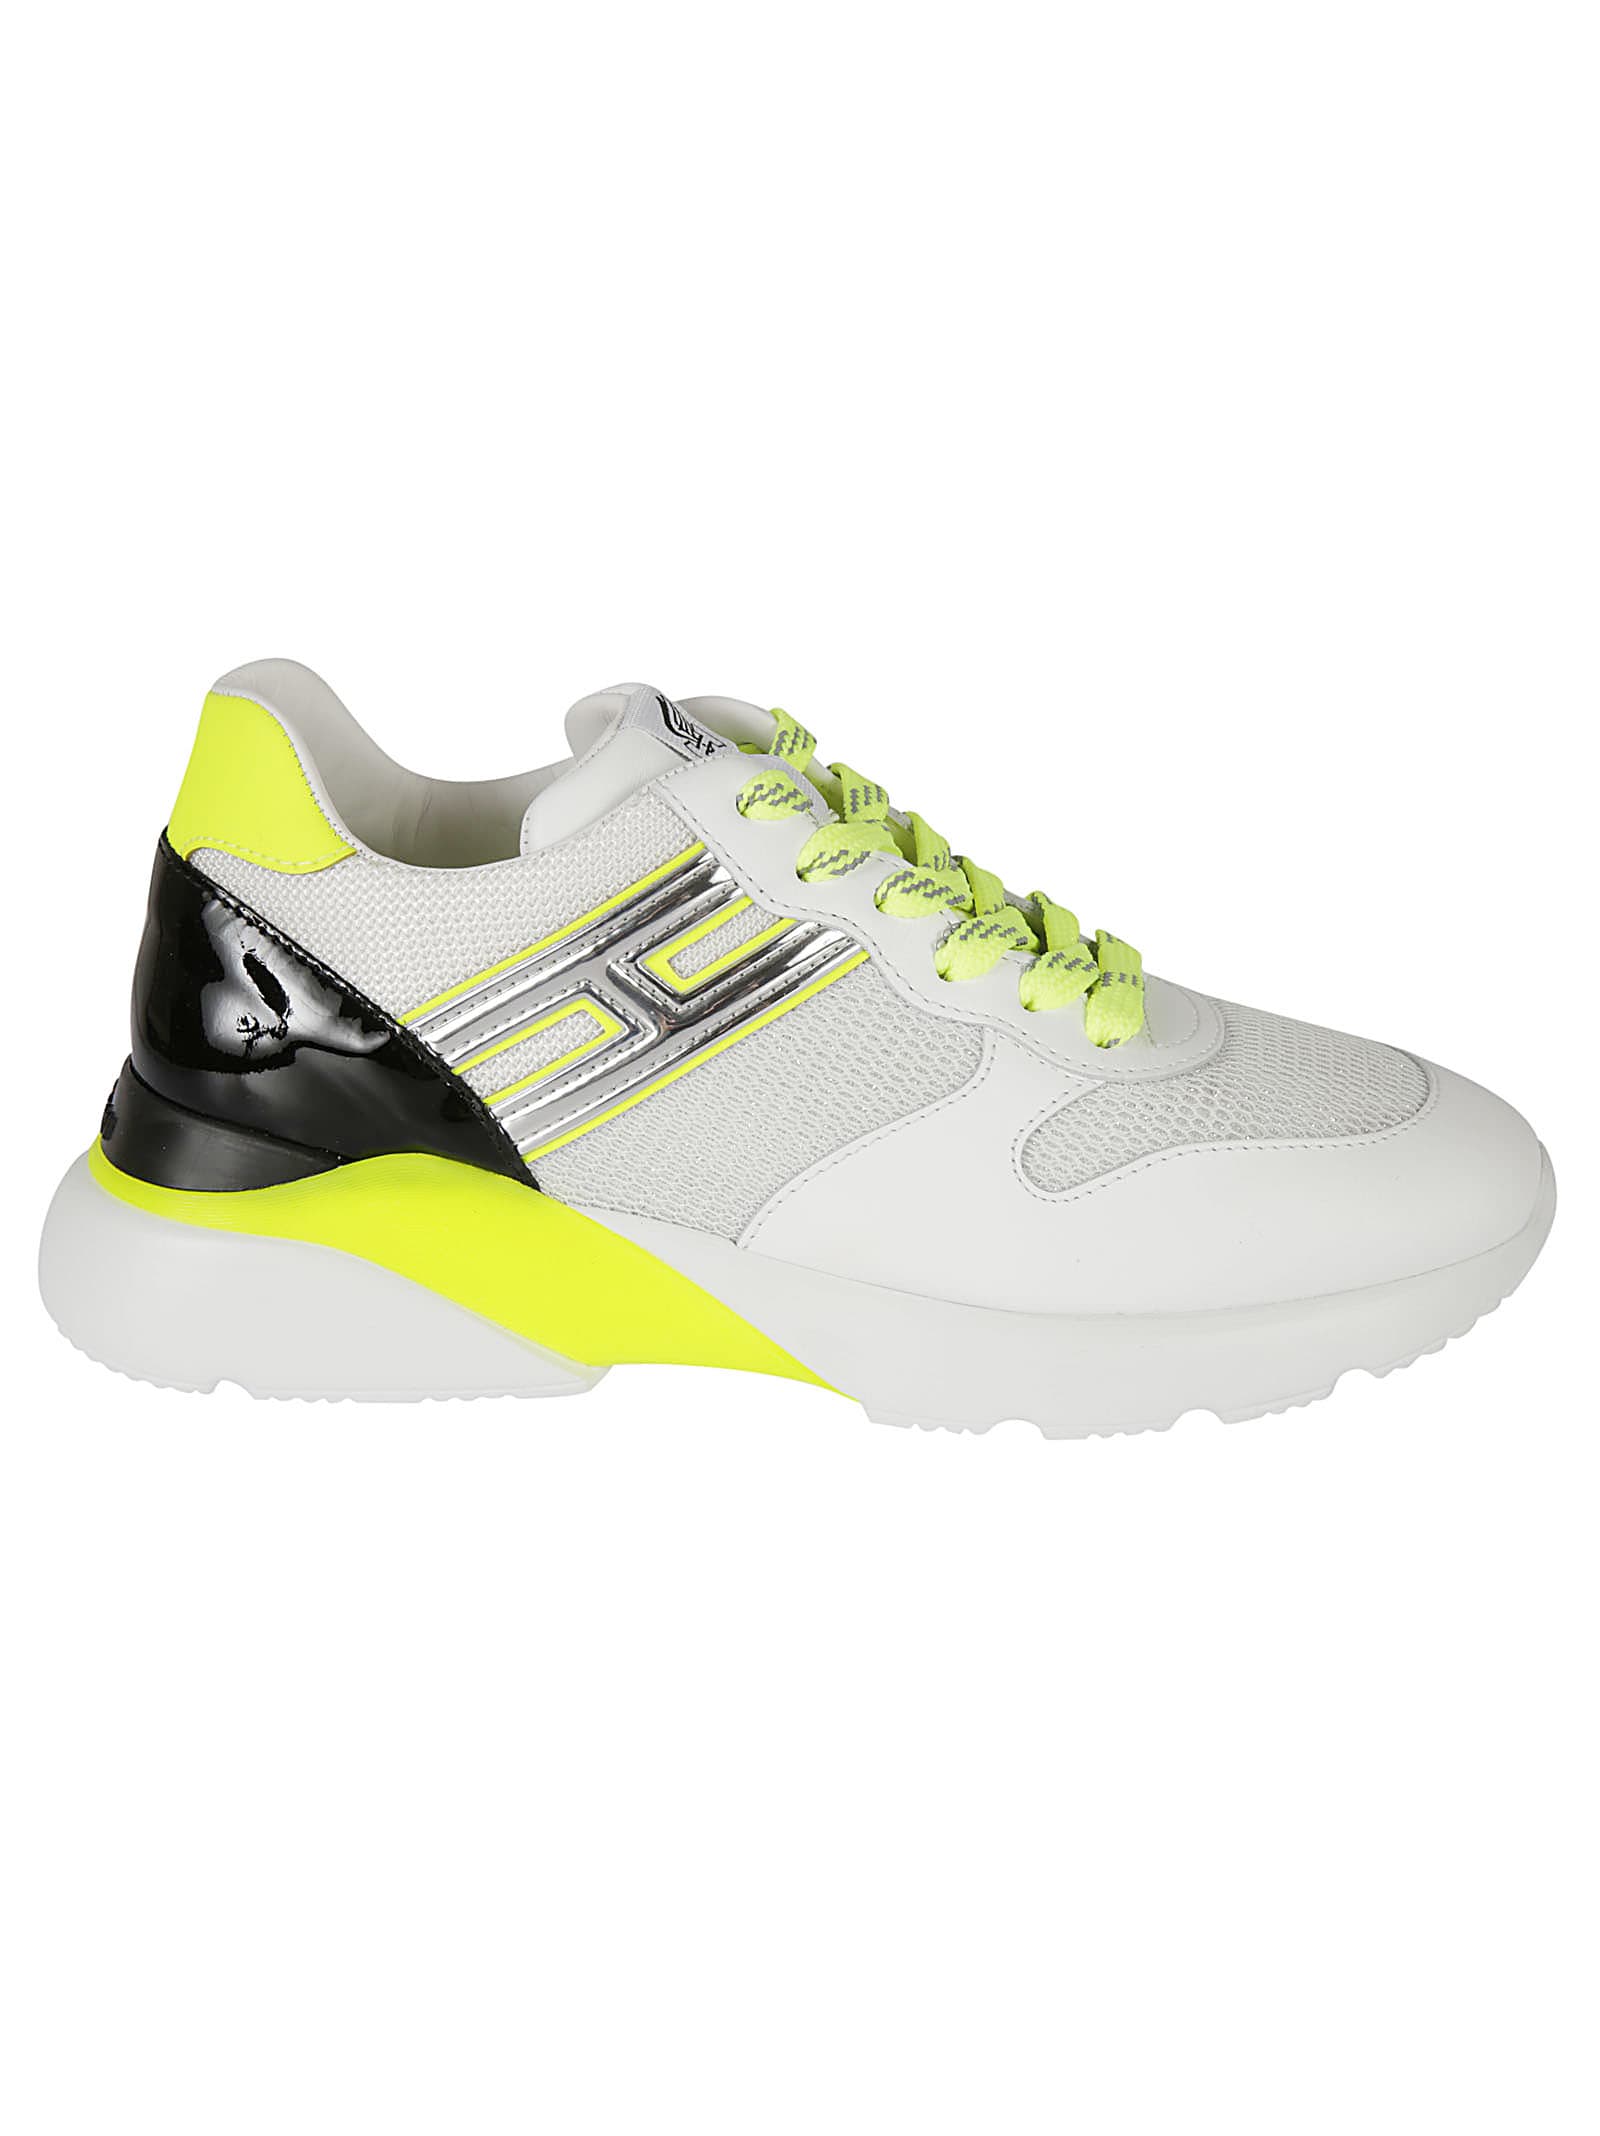 HOGAN ACTIVE ONE H385 SNEAKERS,HXW3850BF50N1F ST10 BIANCO/FLUO